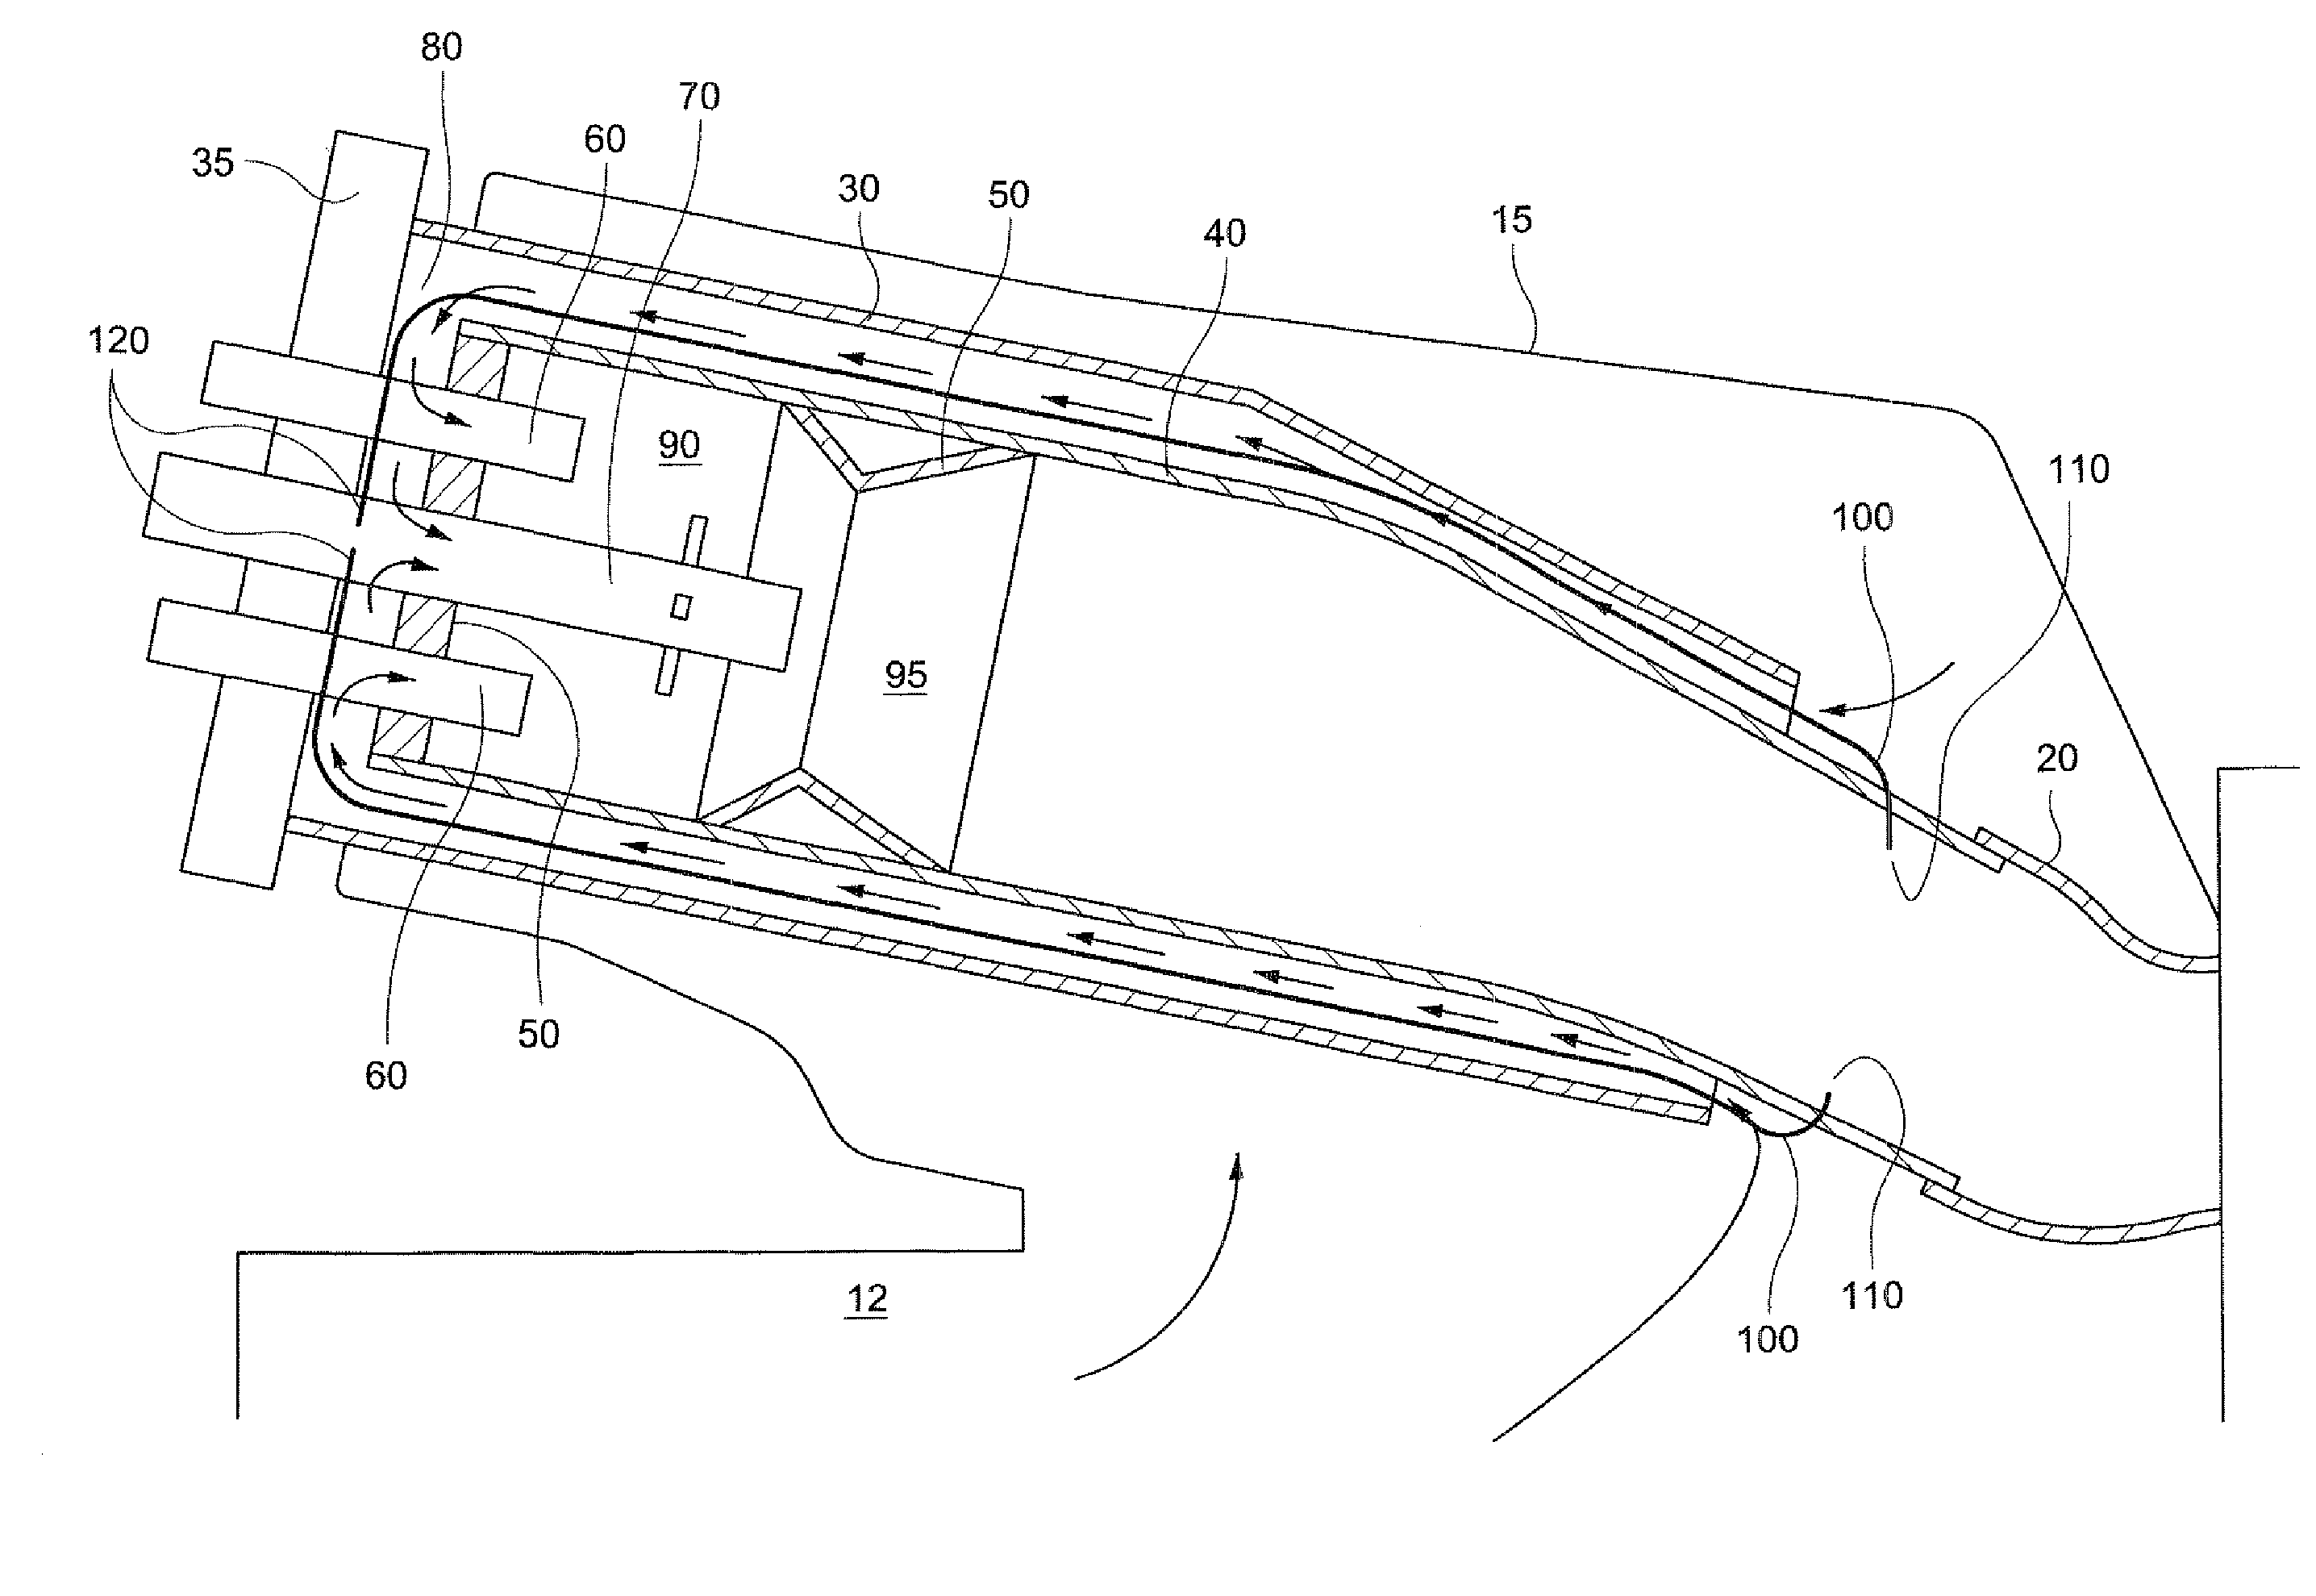 Combustor assembly for a turbine engine that mixes combustion products with purge air